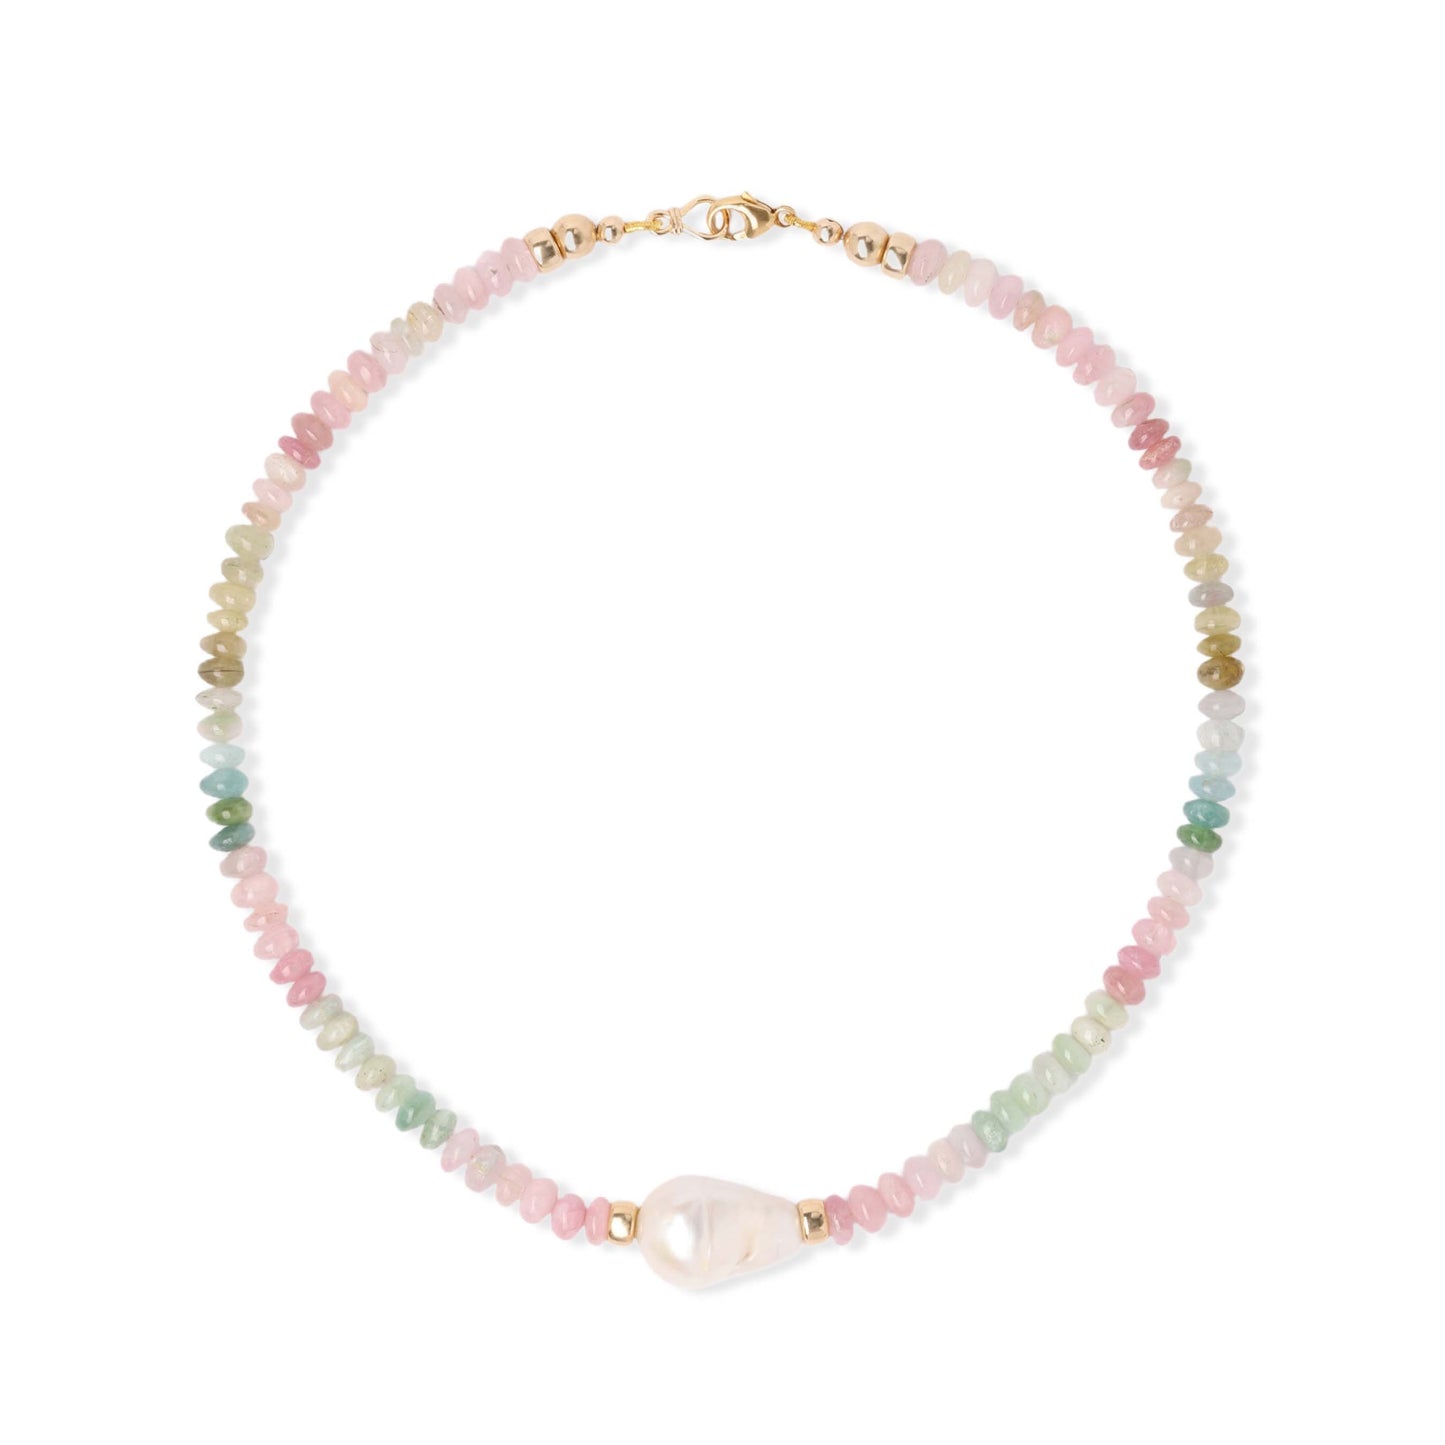 Pastel Tourmaline and Baroque Pearl Necklace